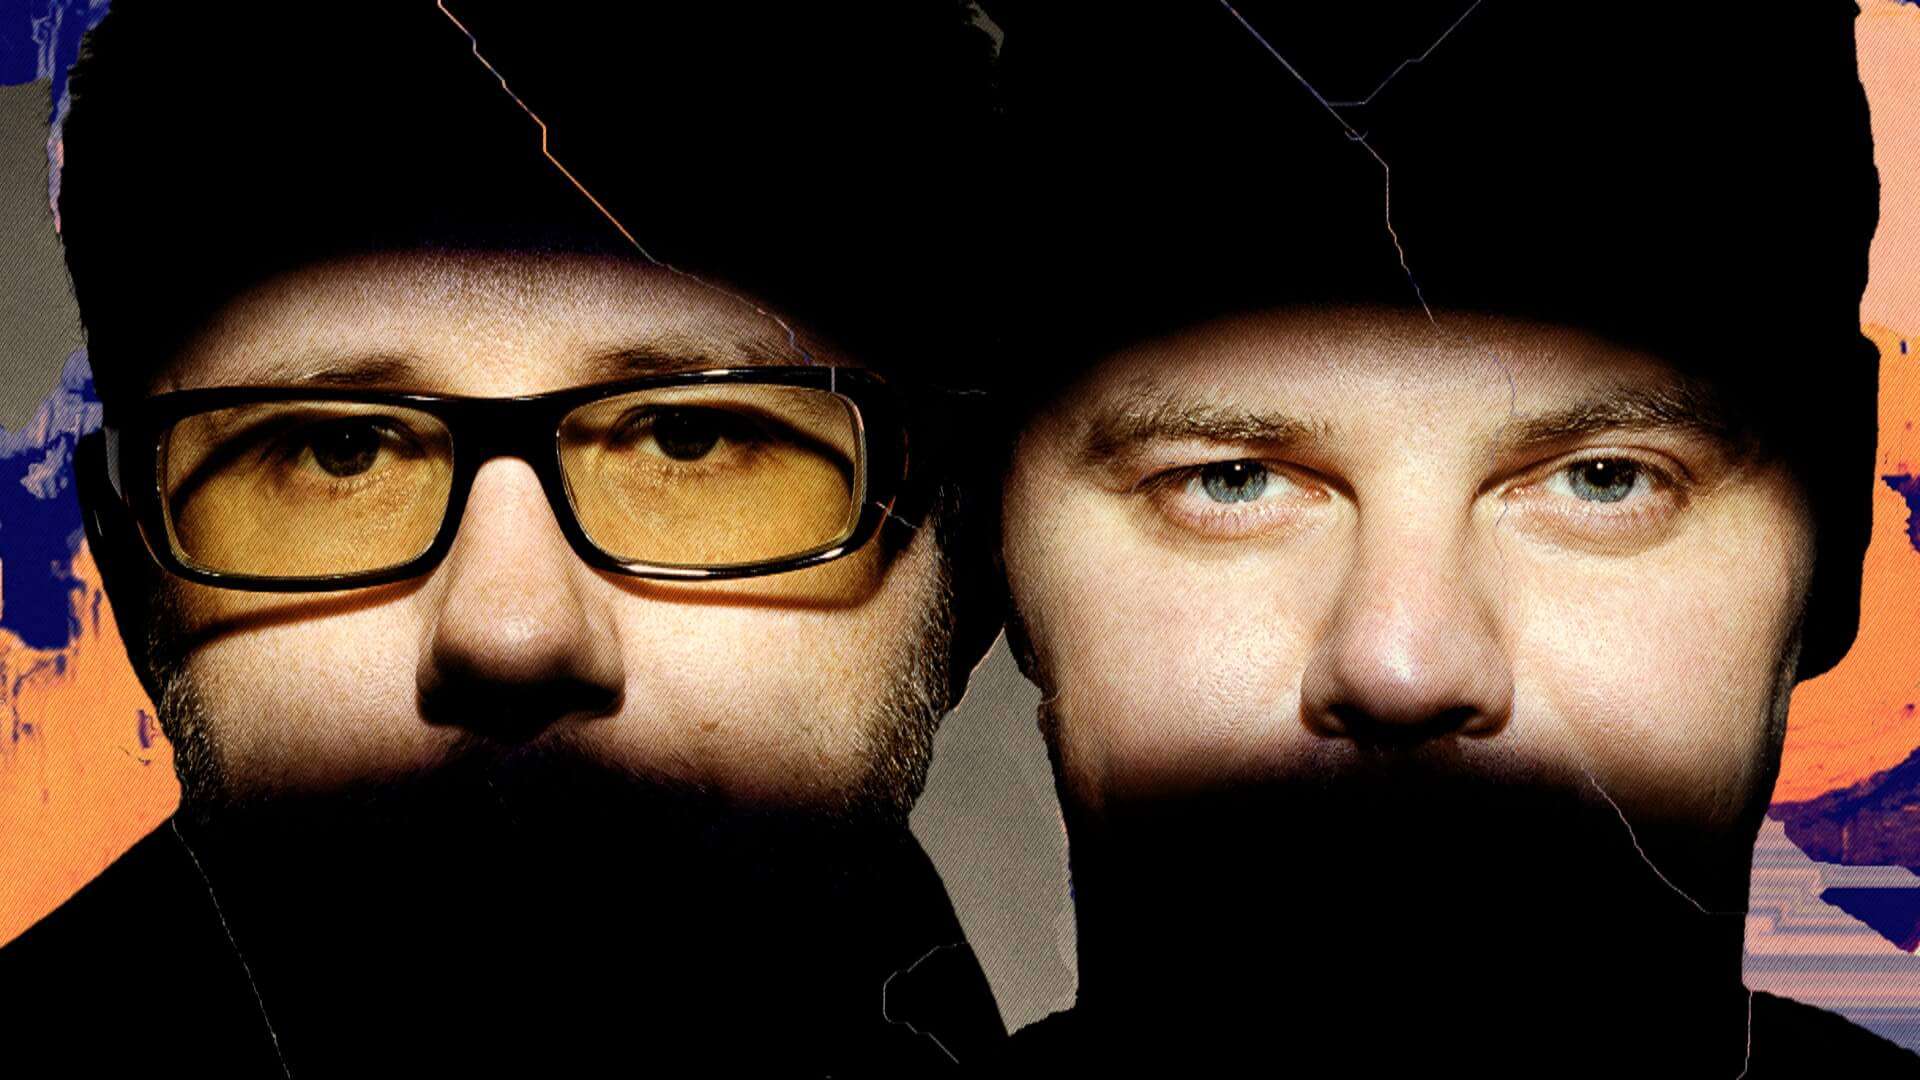 The Chemical Brothers release new music video for ‘Goodbye’ alongside Erol Alkan remix 